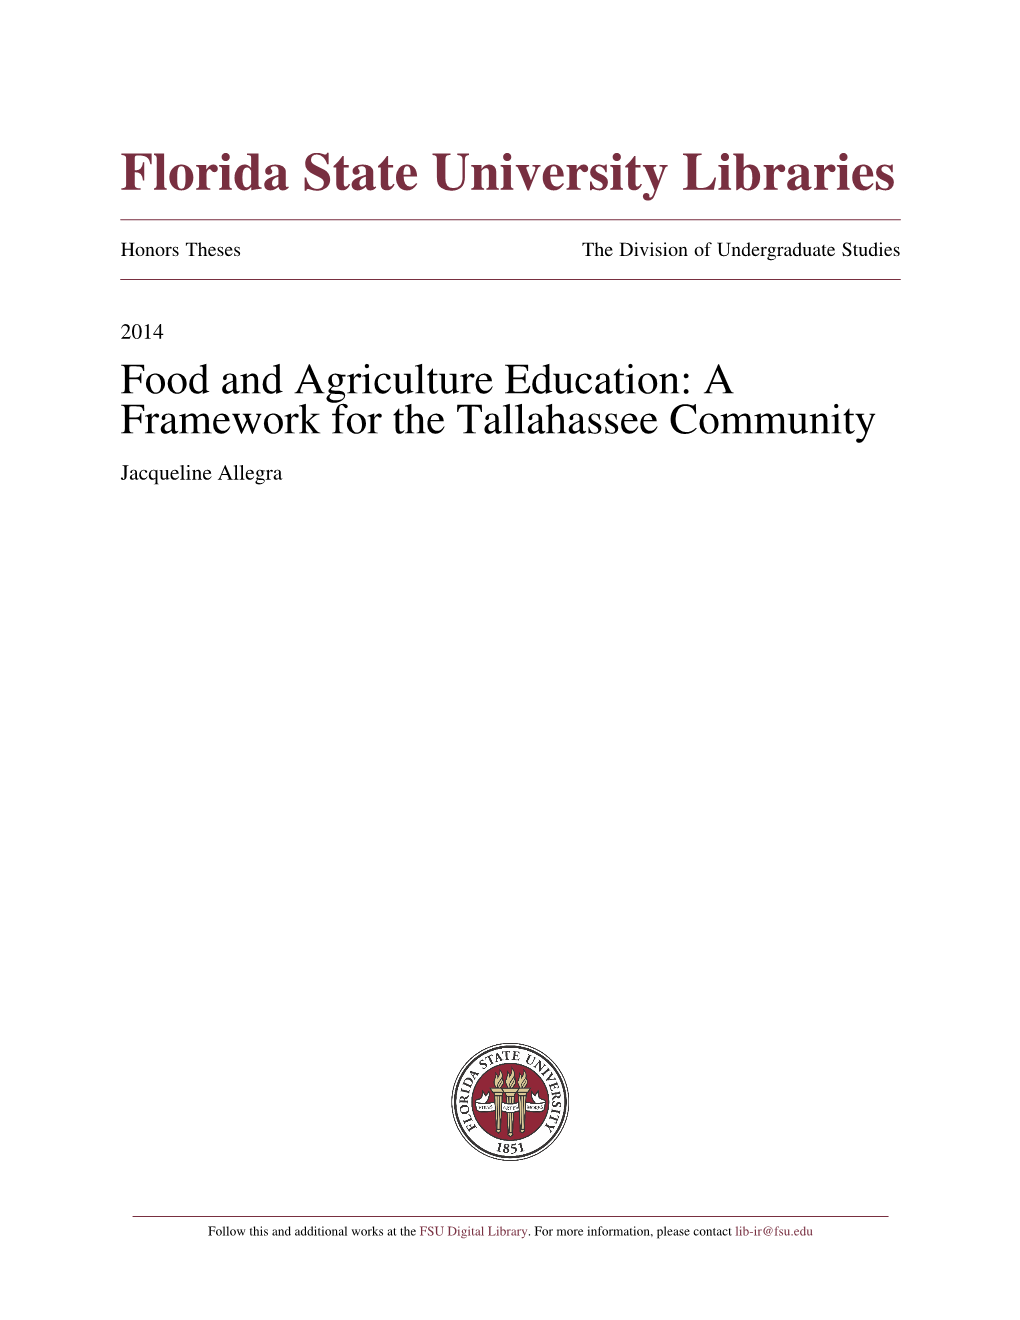 Food and Agriculture Education: a Framework for the Tallahassee Community Jacqueline Allegra